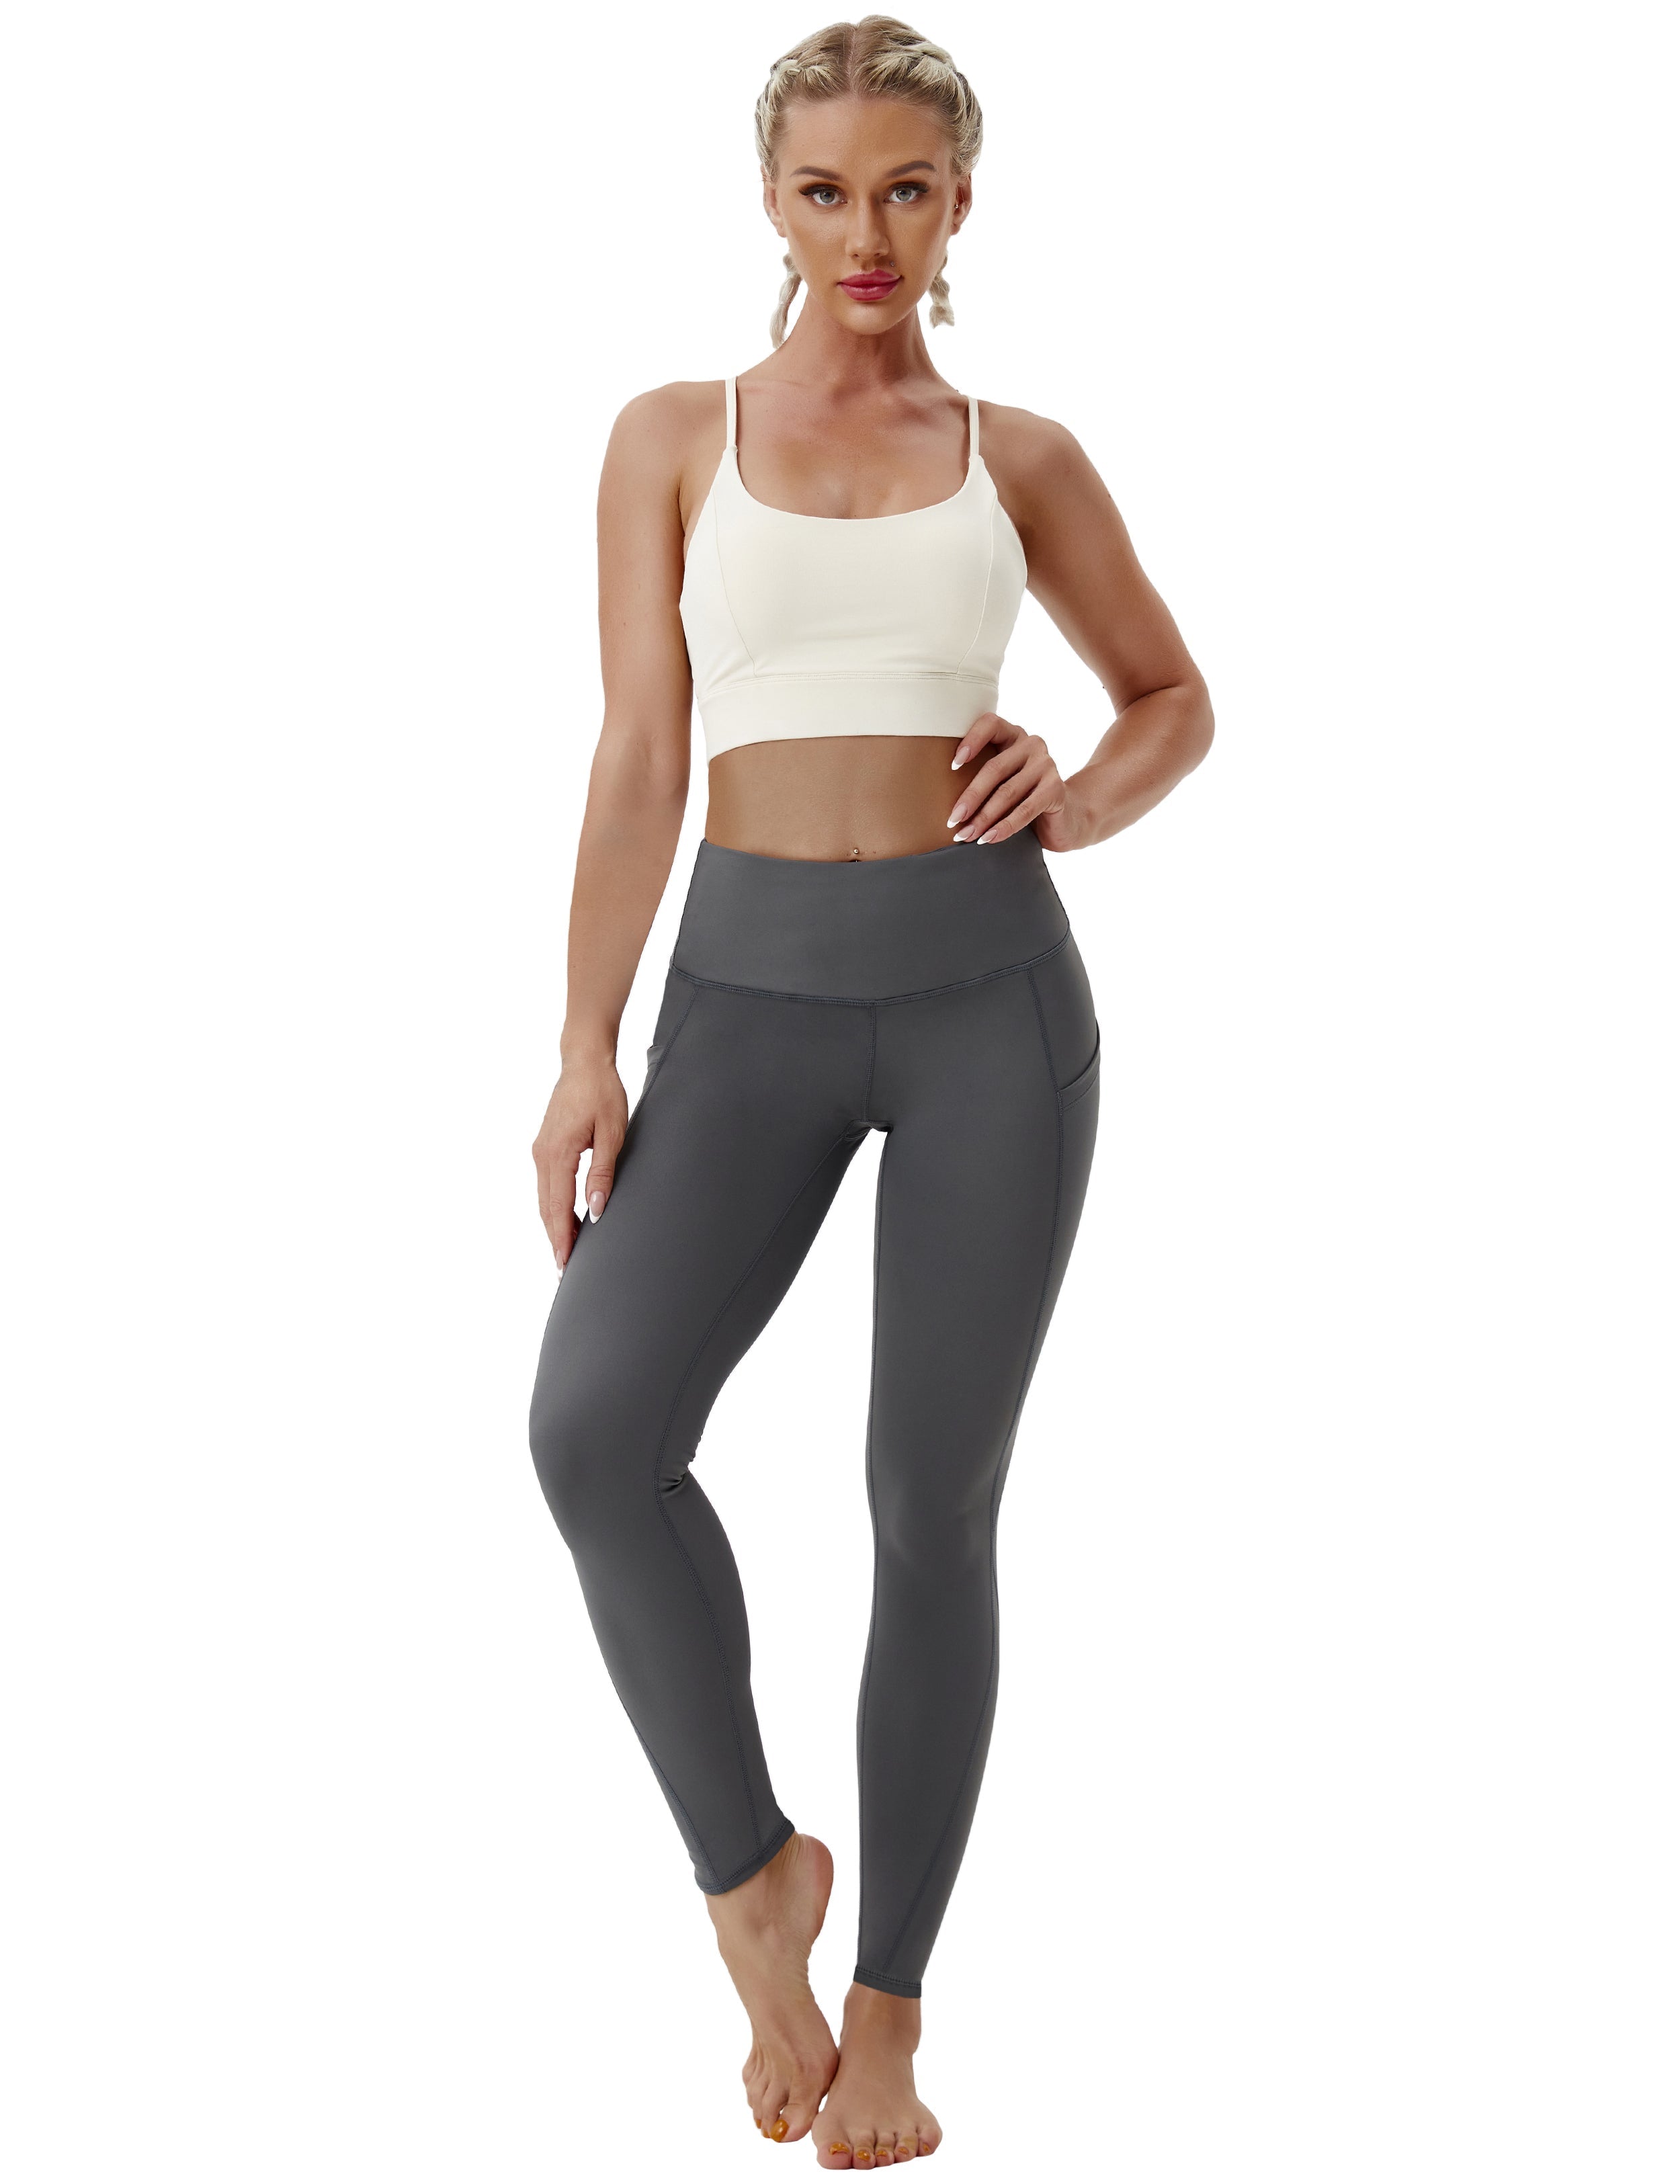 High Waist Side Pockets Tall Size Pants shadowcharcoal 75% Nylon, 25% Spandex Fabric doesn't attract lint easily 4-way stretch No see-through Moisture-wicking Tummy control Inner pocket